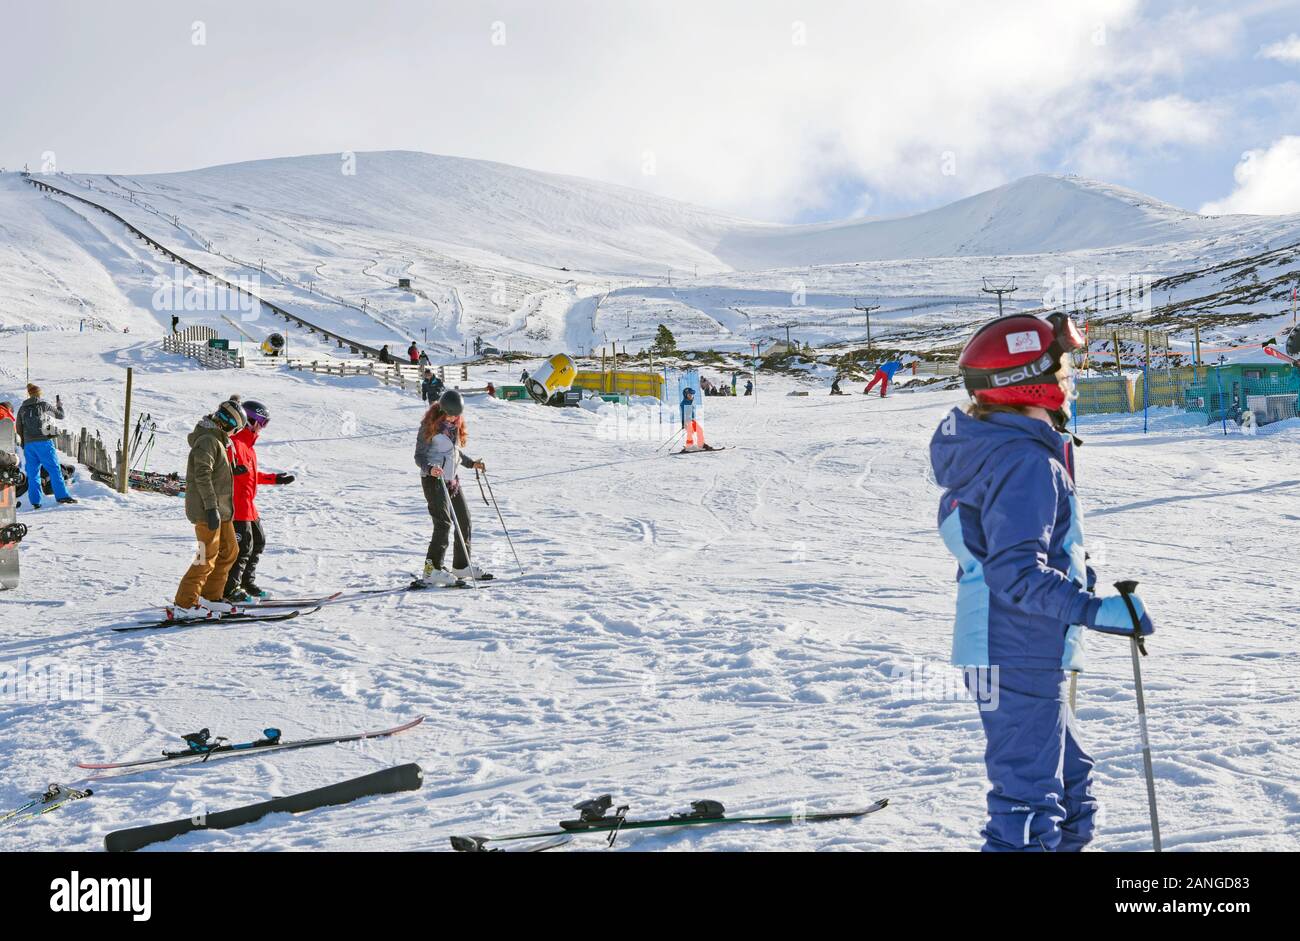 Skiers and snowboarders on sunny snow slopes at Cairngorm Mountain Ski Centre  Cairngorms National Park, Aviemore, Scottish Highlands, Scotland UK Stock Photo